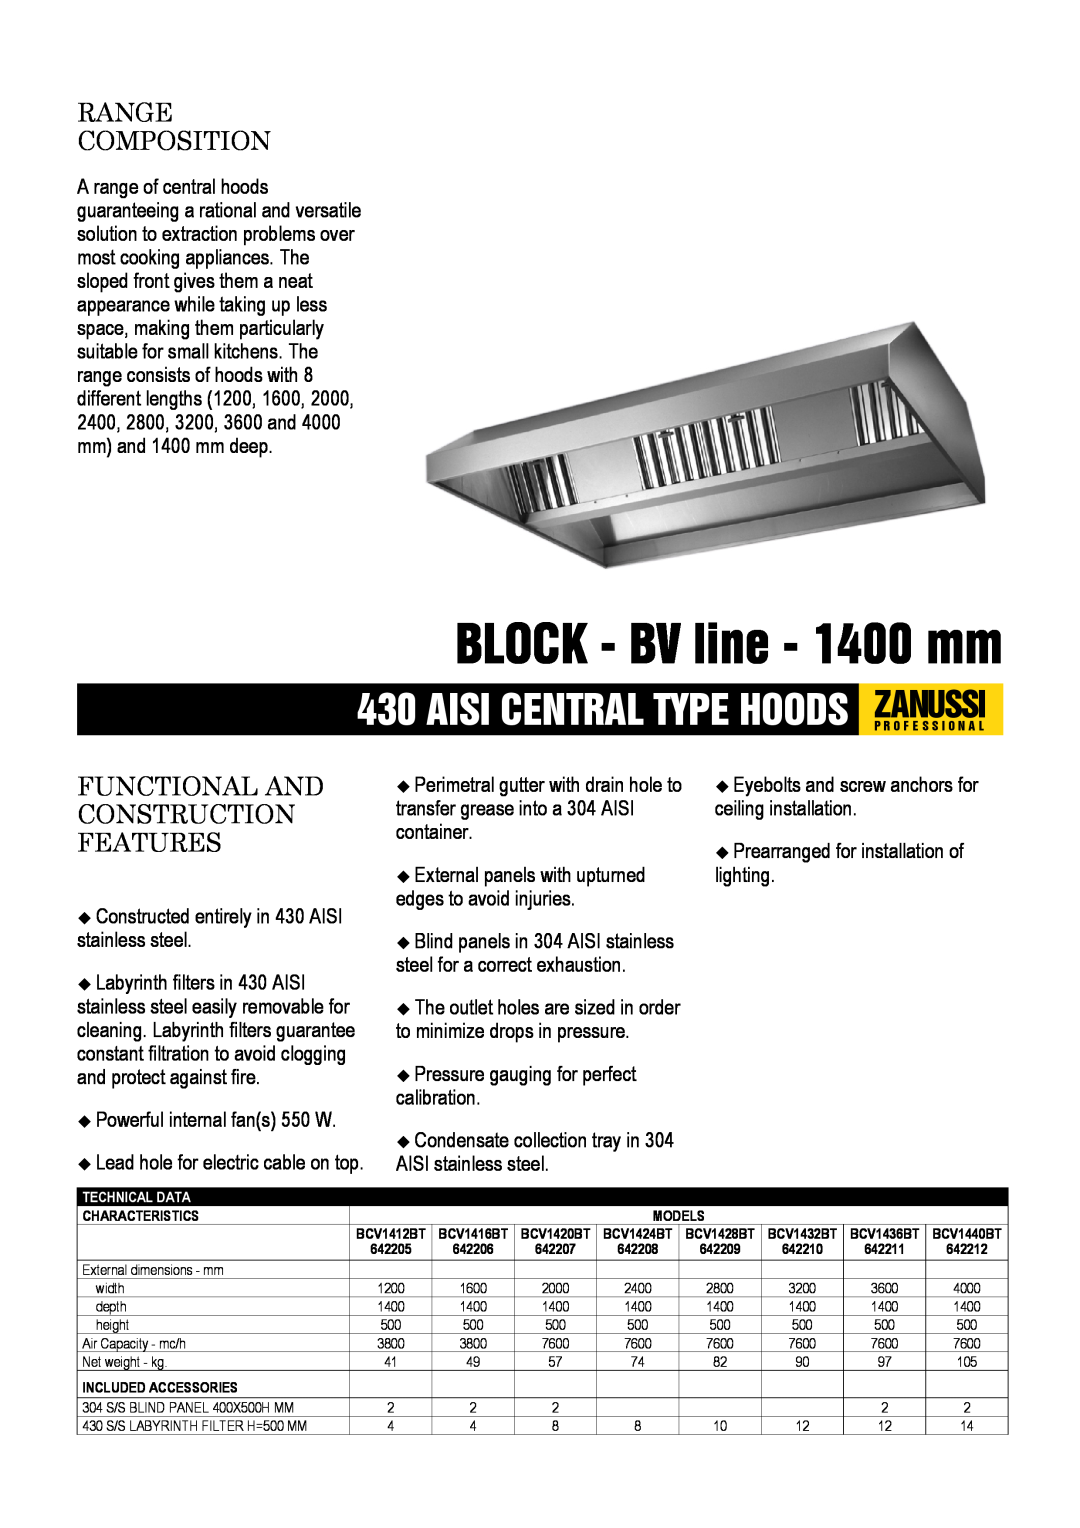 Zanussi 642212, 642209 dimensions BLOCK - BV line - 1400 mm, Range Composition, Functional And Construction Features 